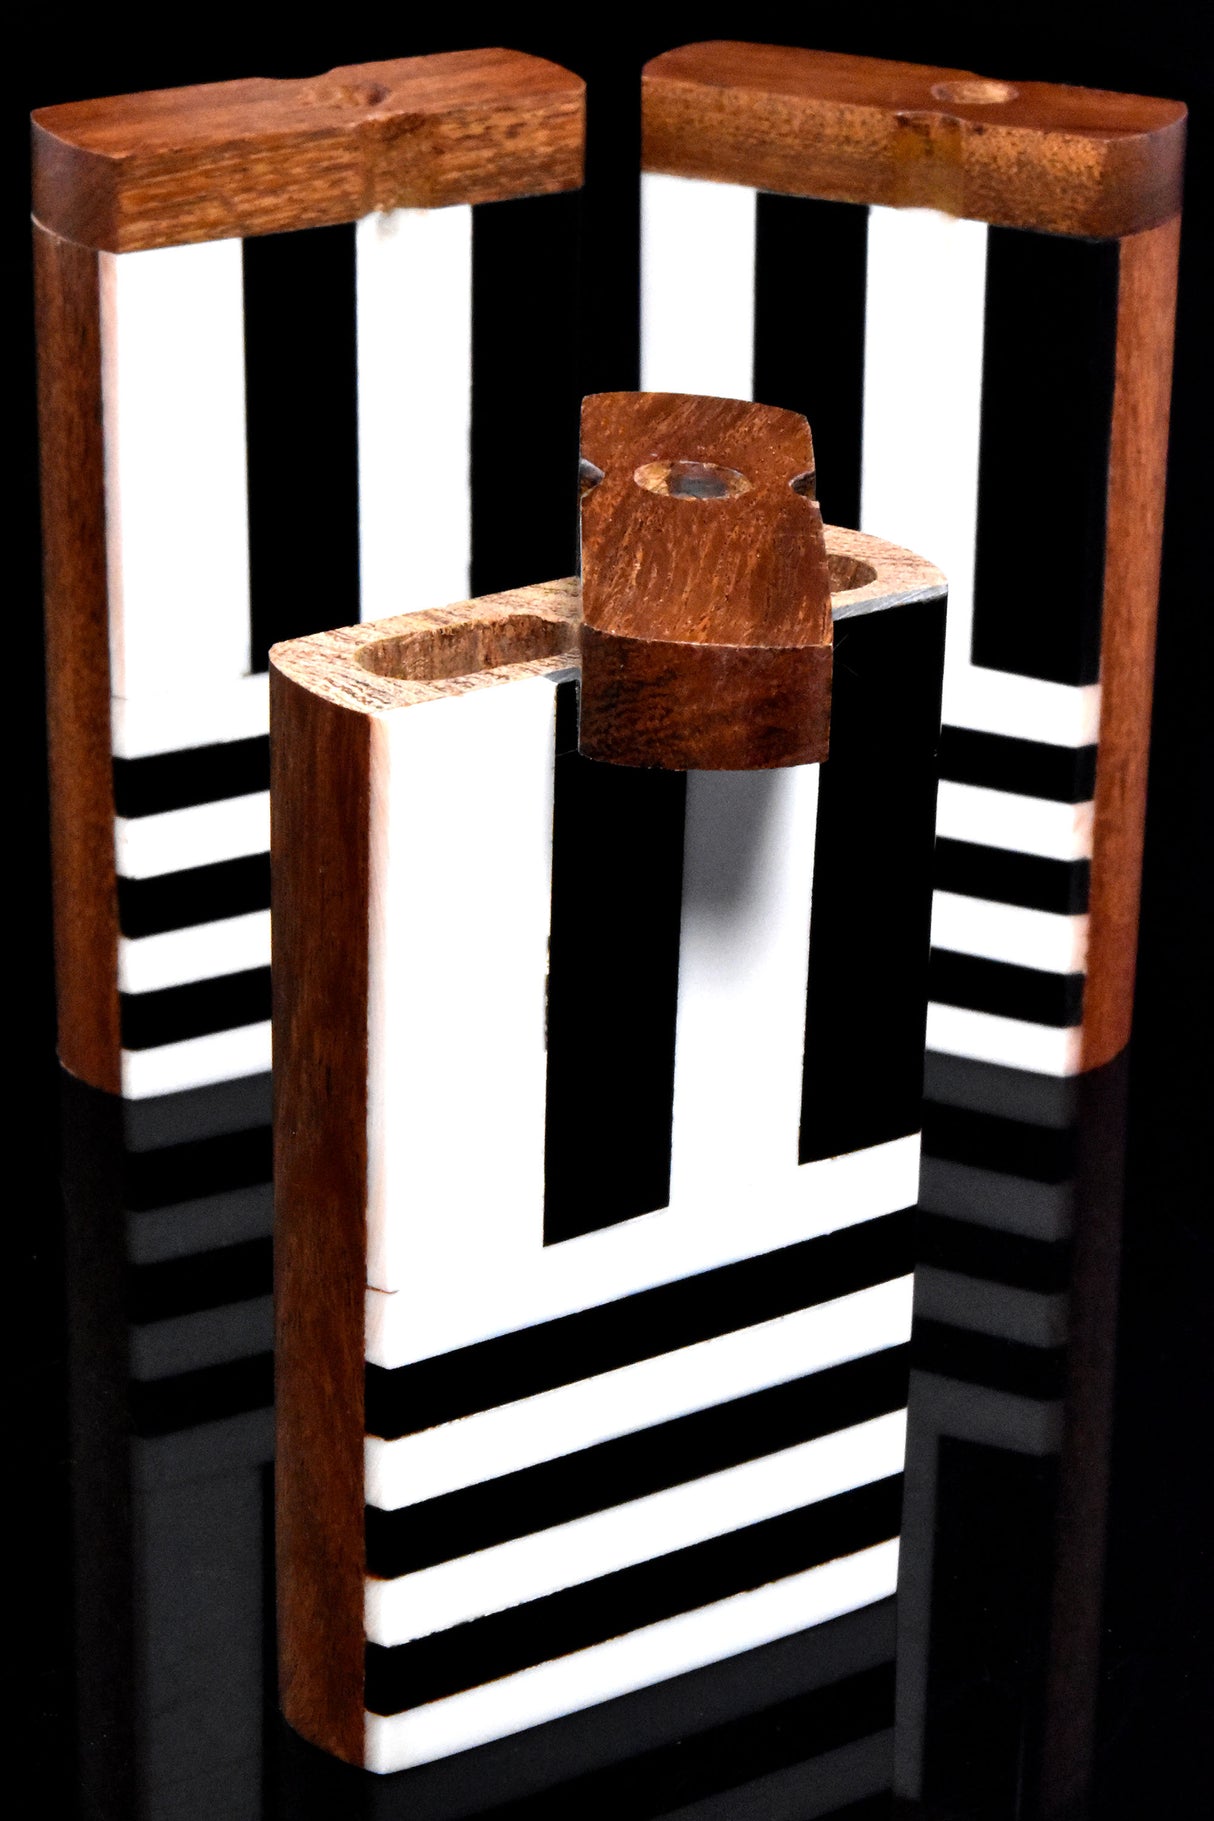 Large Black and White Striped Block Wood Dugout - W0265